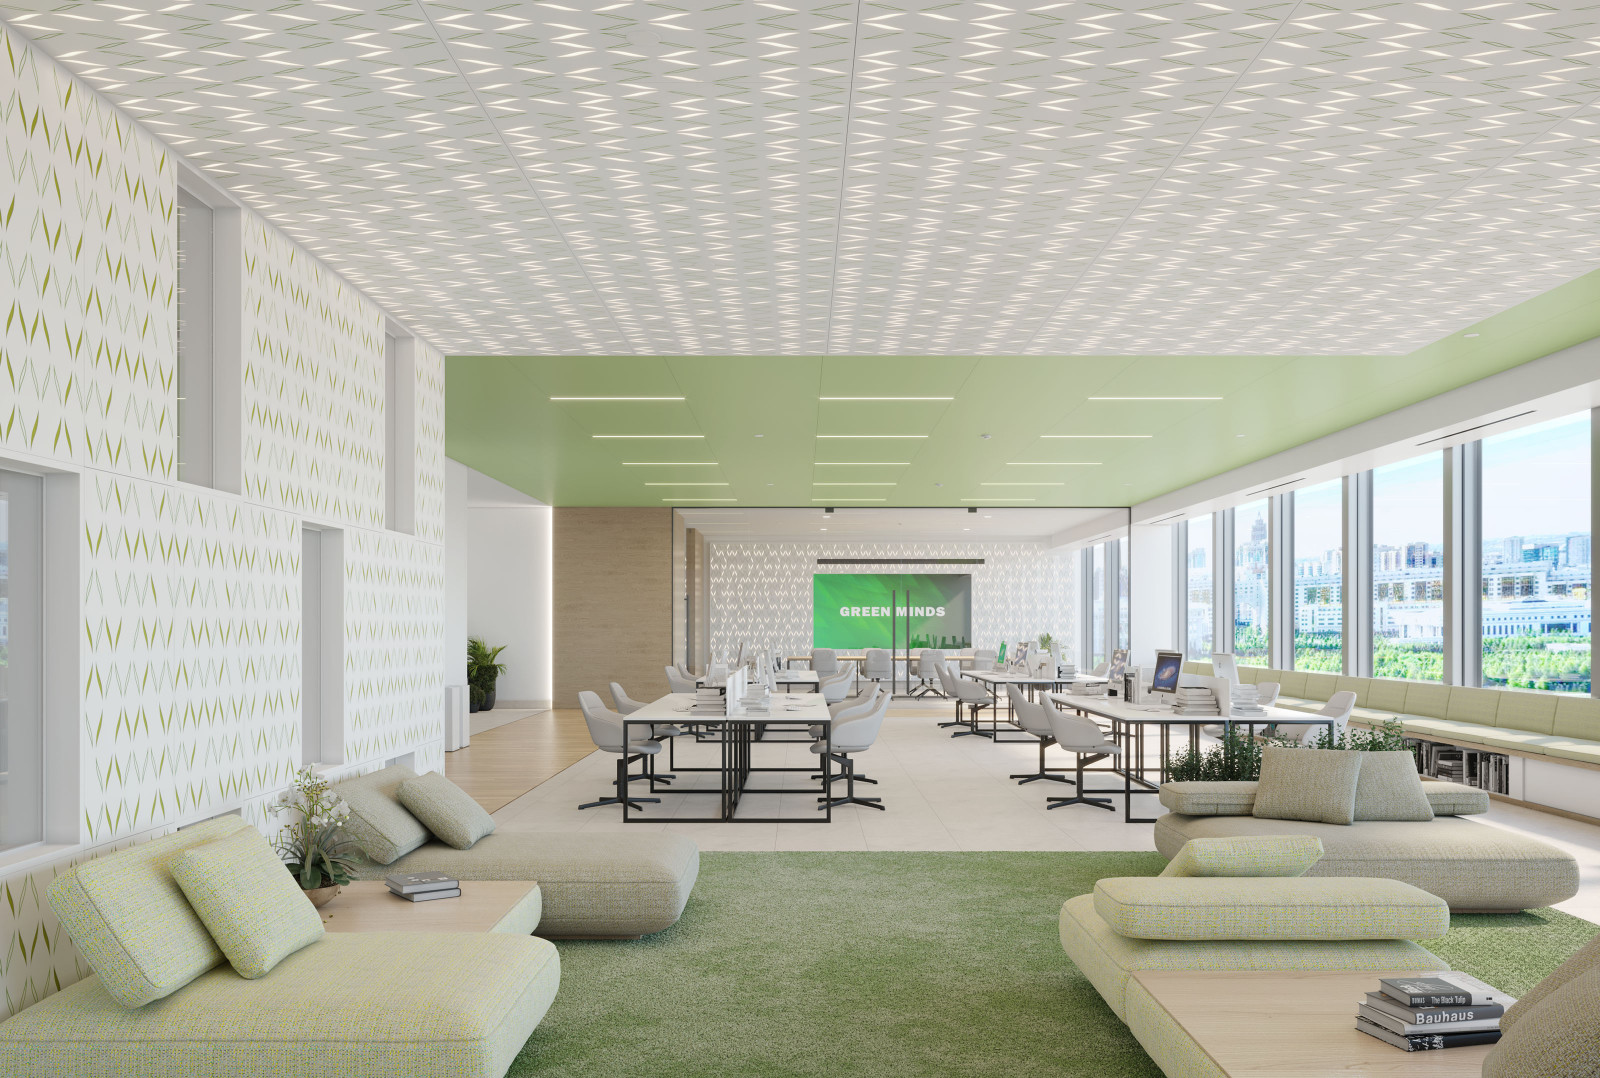 This contemporary biophilic office space has a seating area with green furniture and a green rug. There are also desks in the space with white chairs and computers on the desks. There are Arktura VaporHue™panels on the ceiling and the walls in green and white color, featuring Arktura Soft Sound® backers in the wall system, and Arktura Backlighting in the Ceiling Panels.